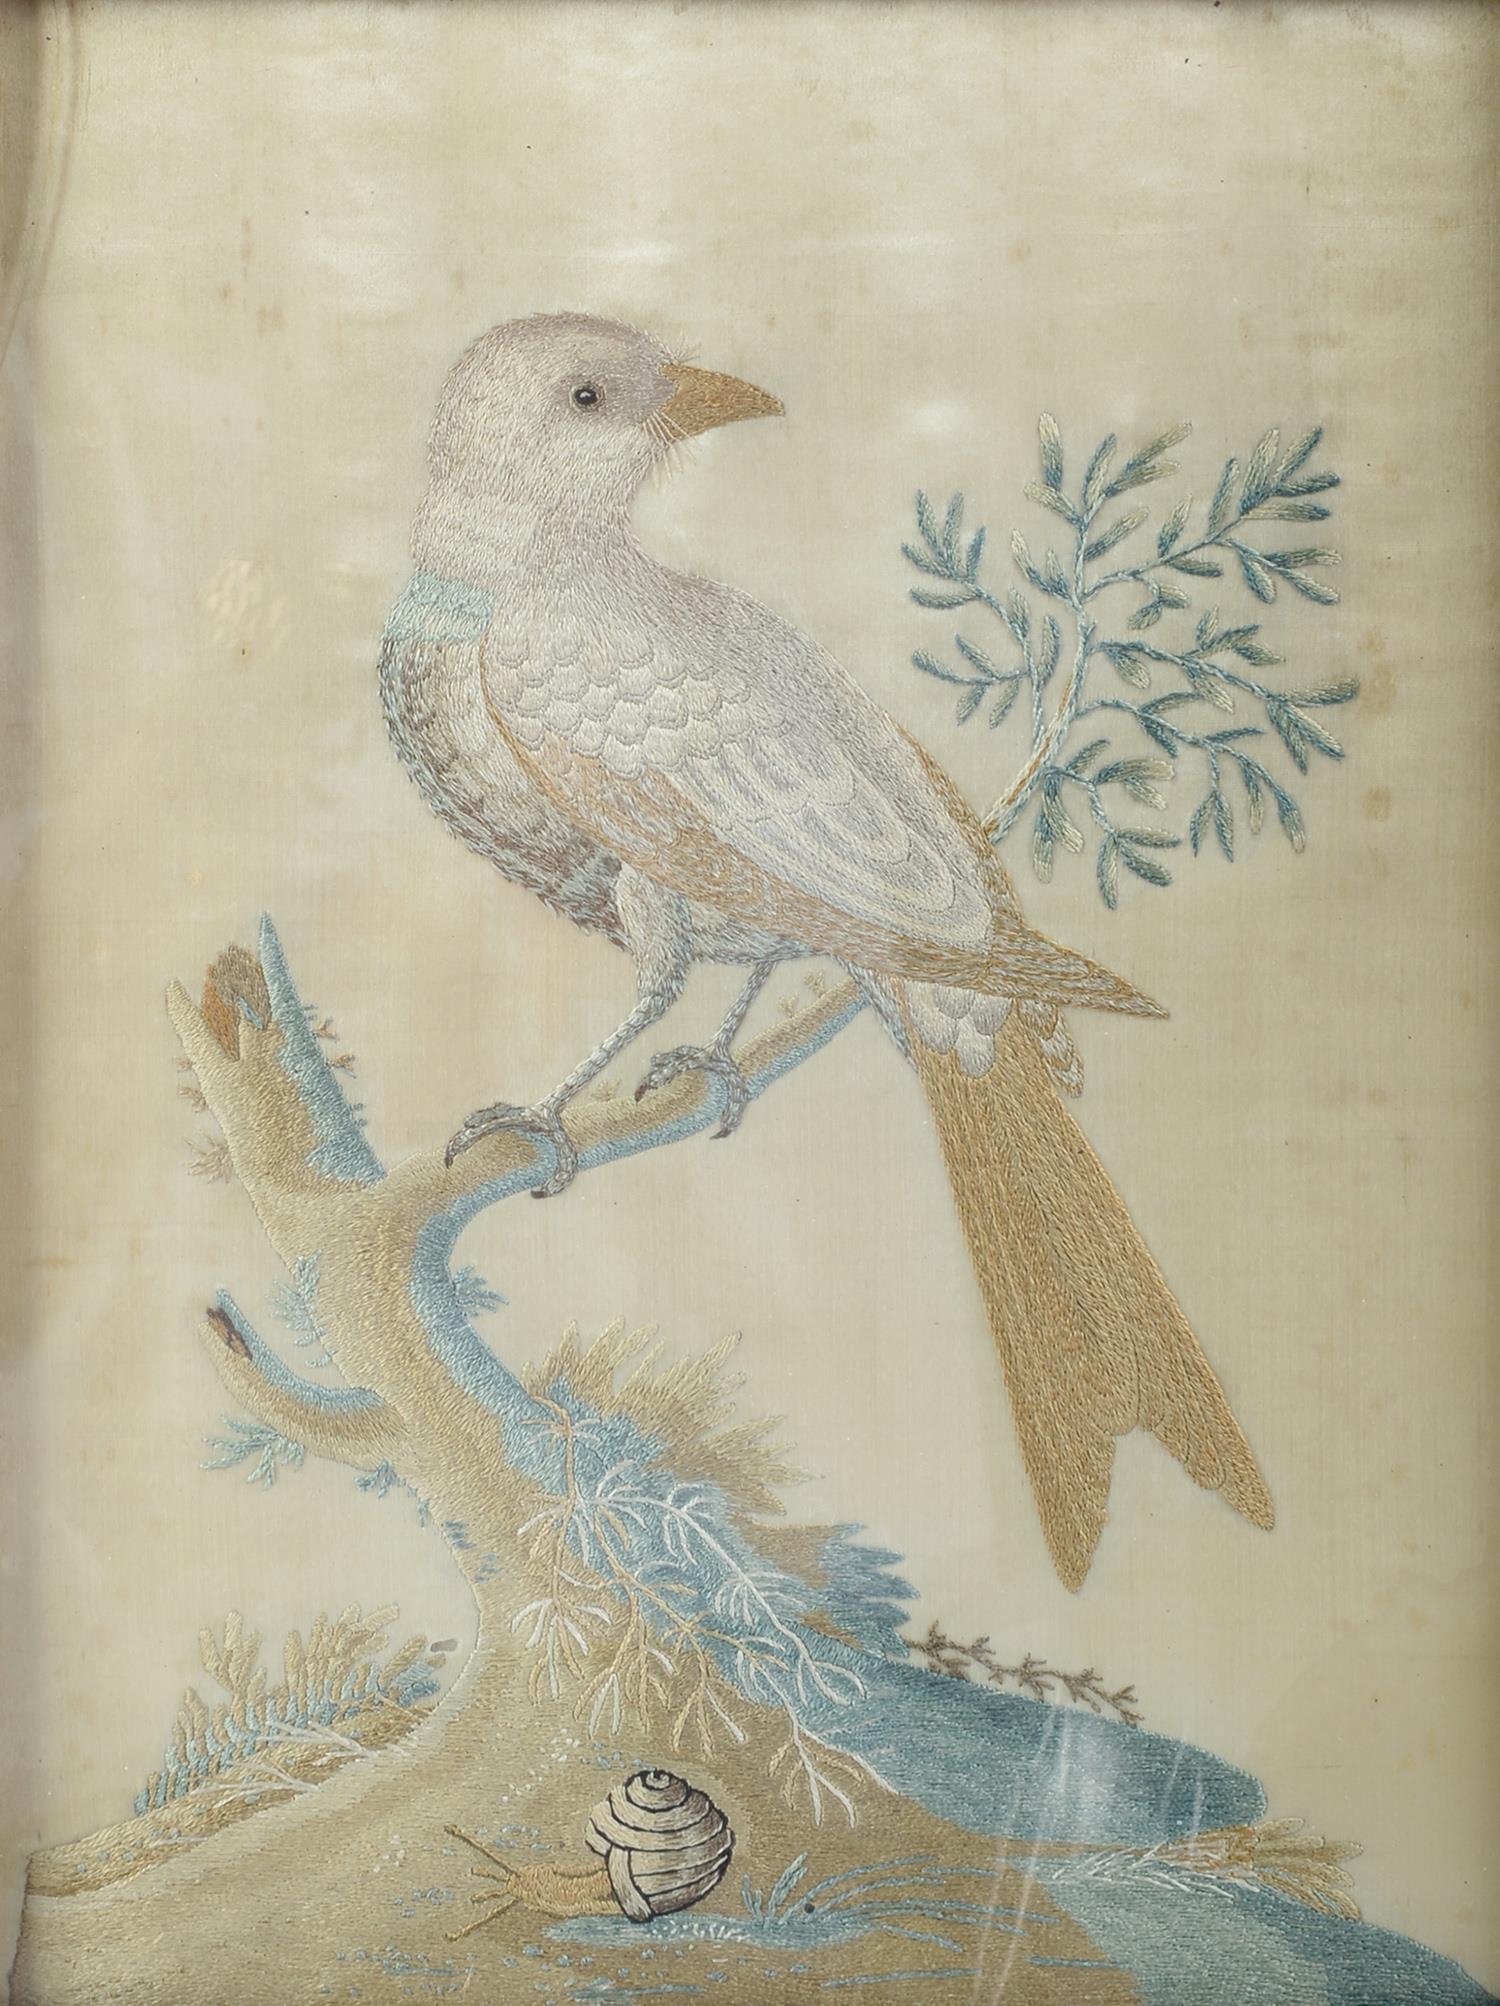 An embroidered silk picture of a bird on a branch, a snail at the base of the tree,  worked in